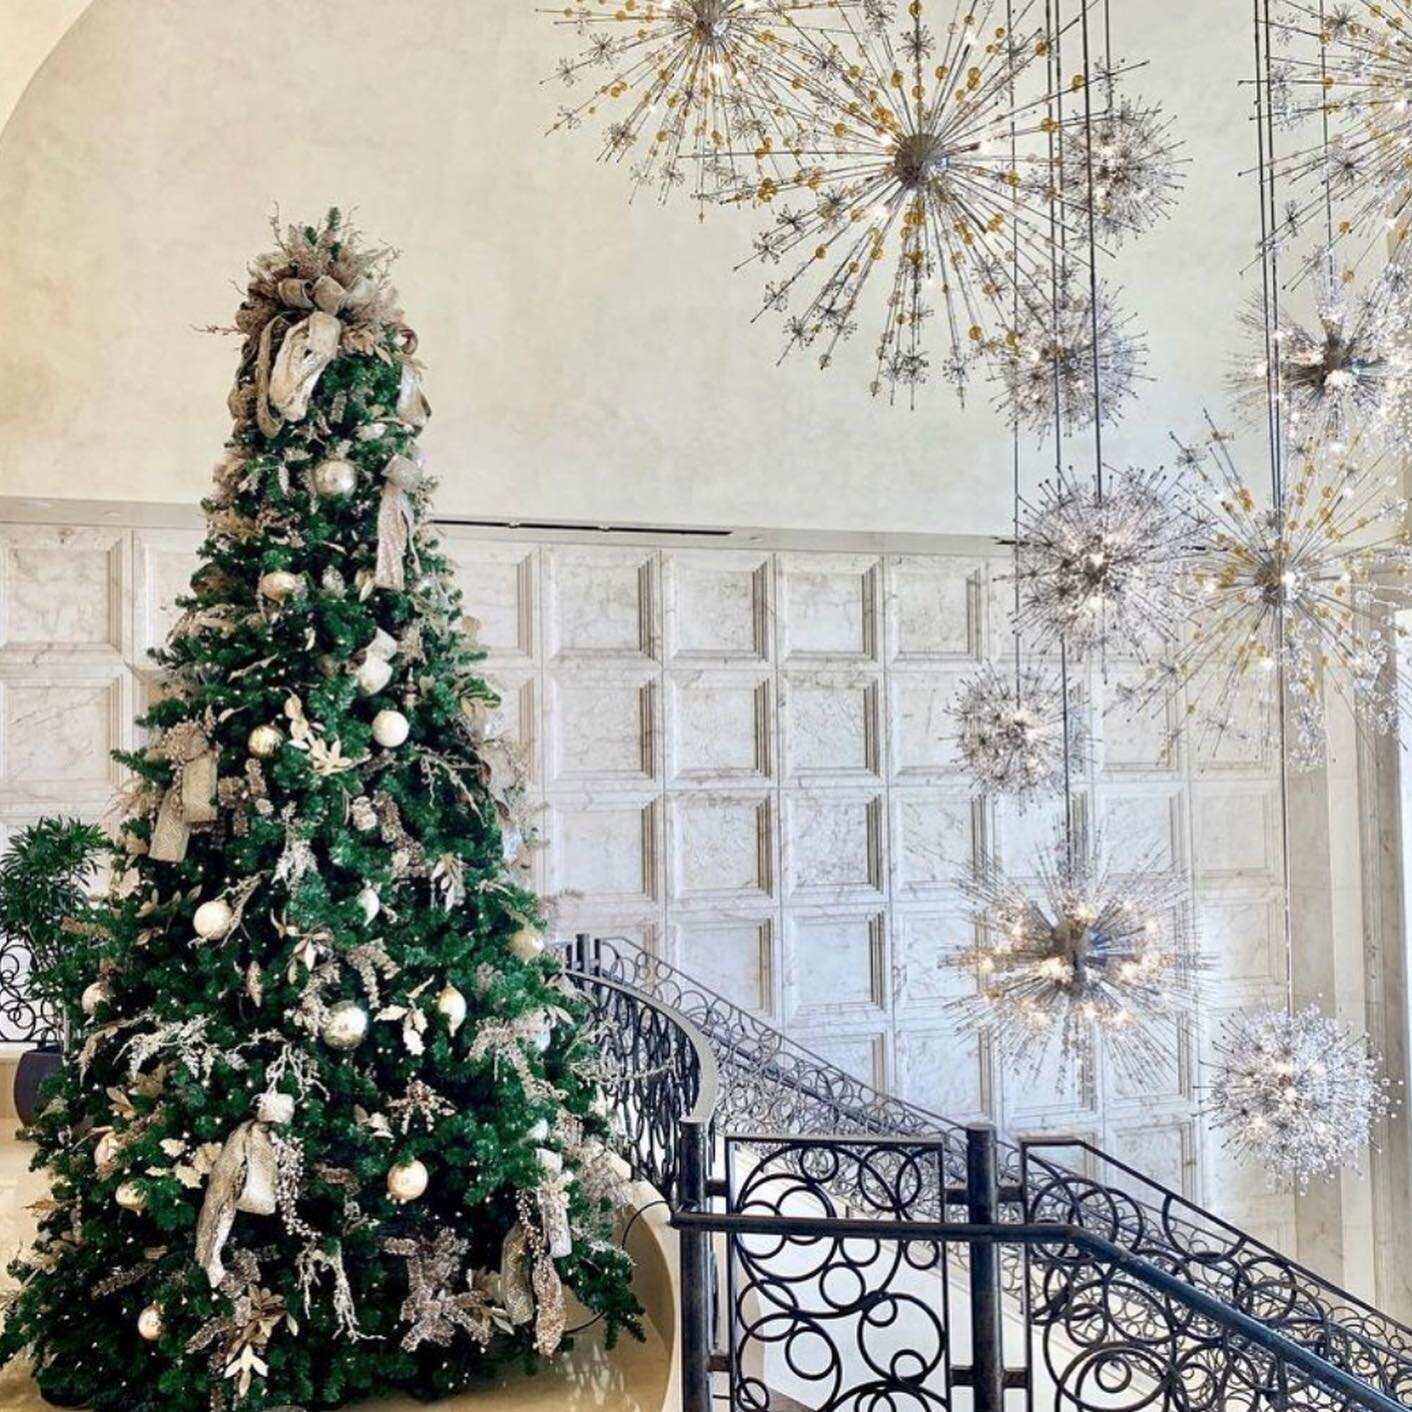 One of our favorite parts of holiday events and travel this time of year is the gorgeous holiday decorations! This year may look different in many ways, but this always brings us so much joy!